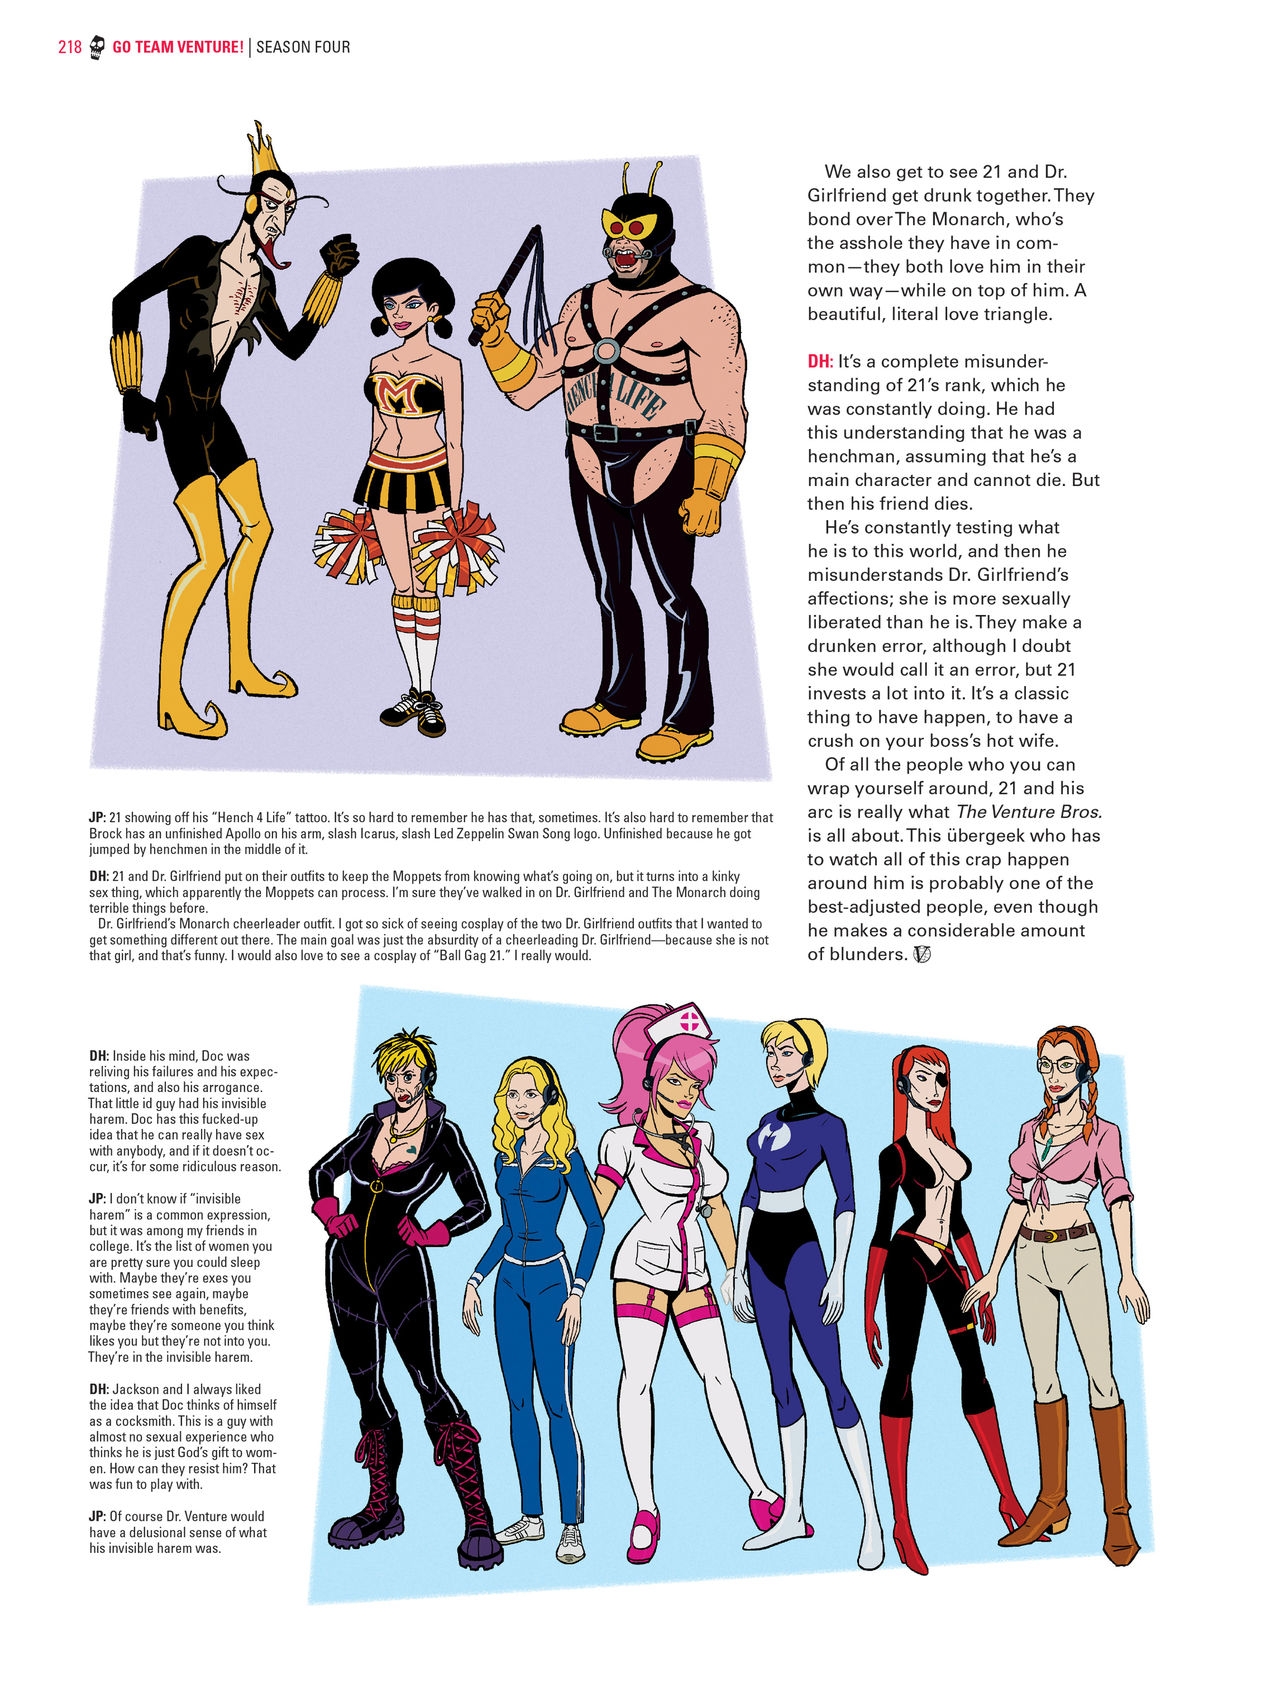 Go Team Venture! - The Art and Making of the Venture Bros 216